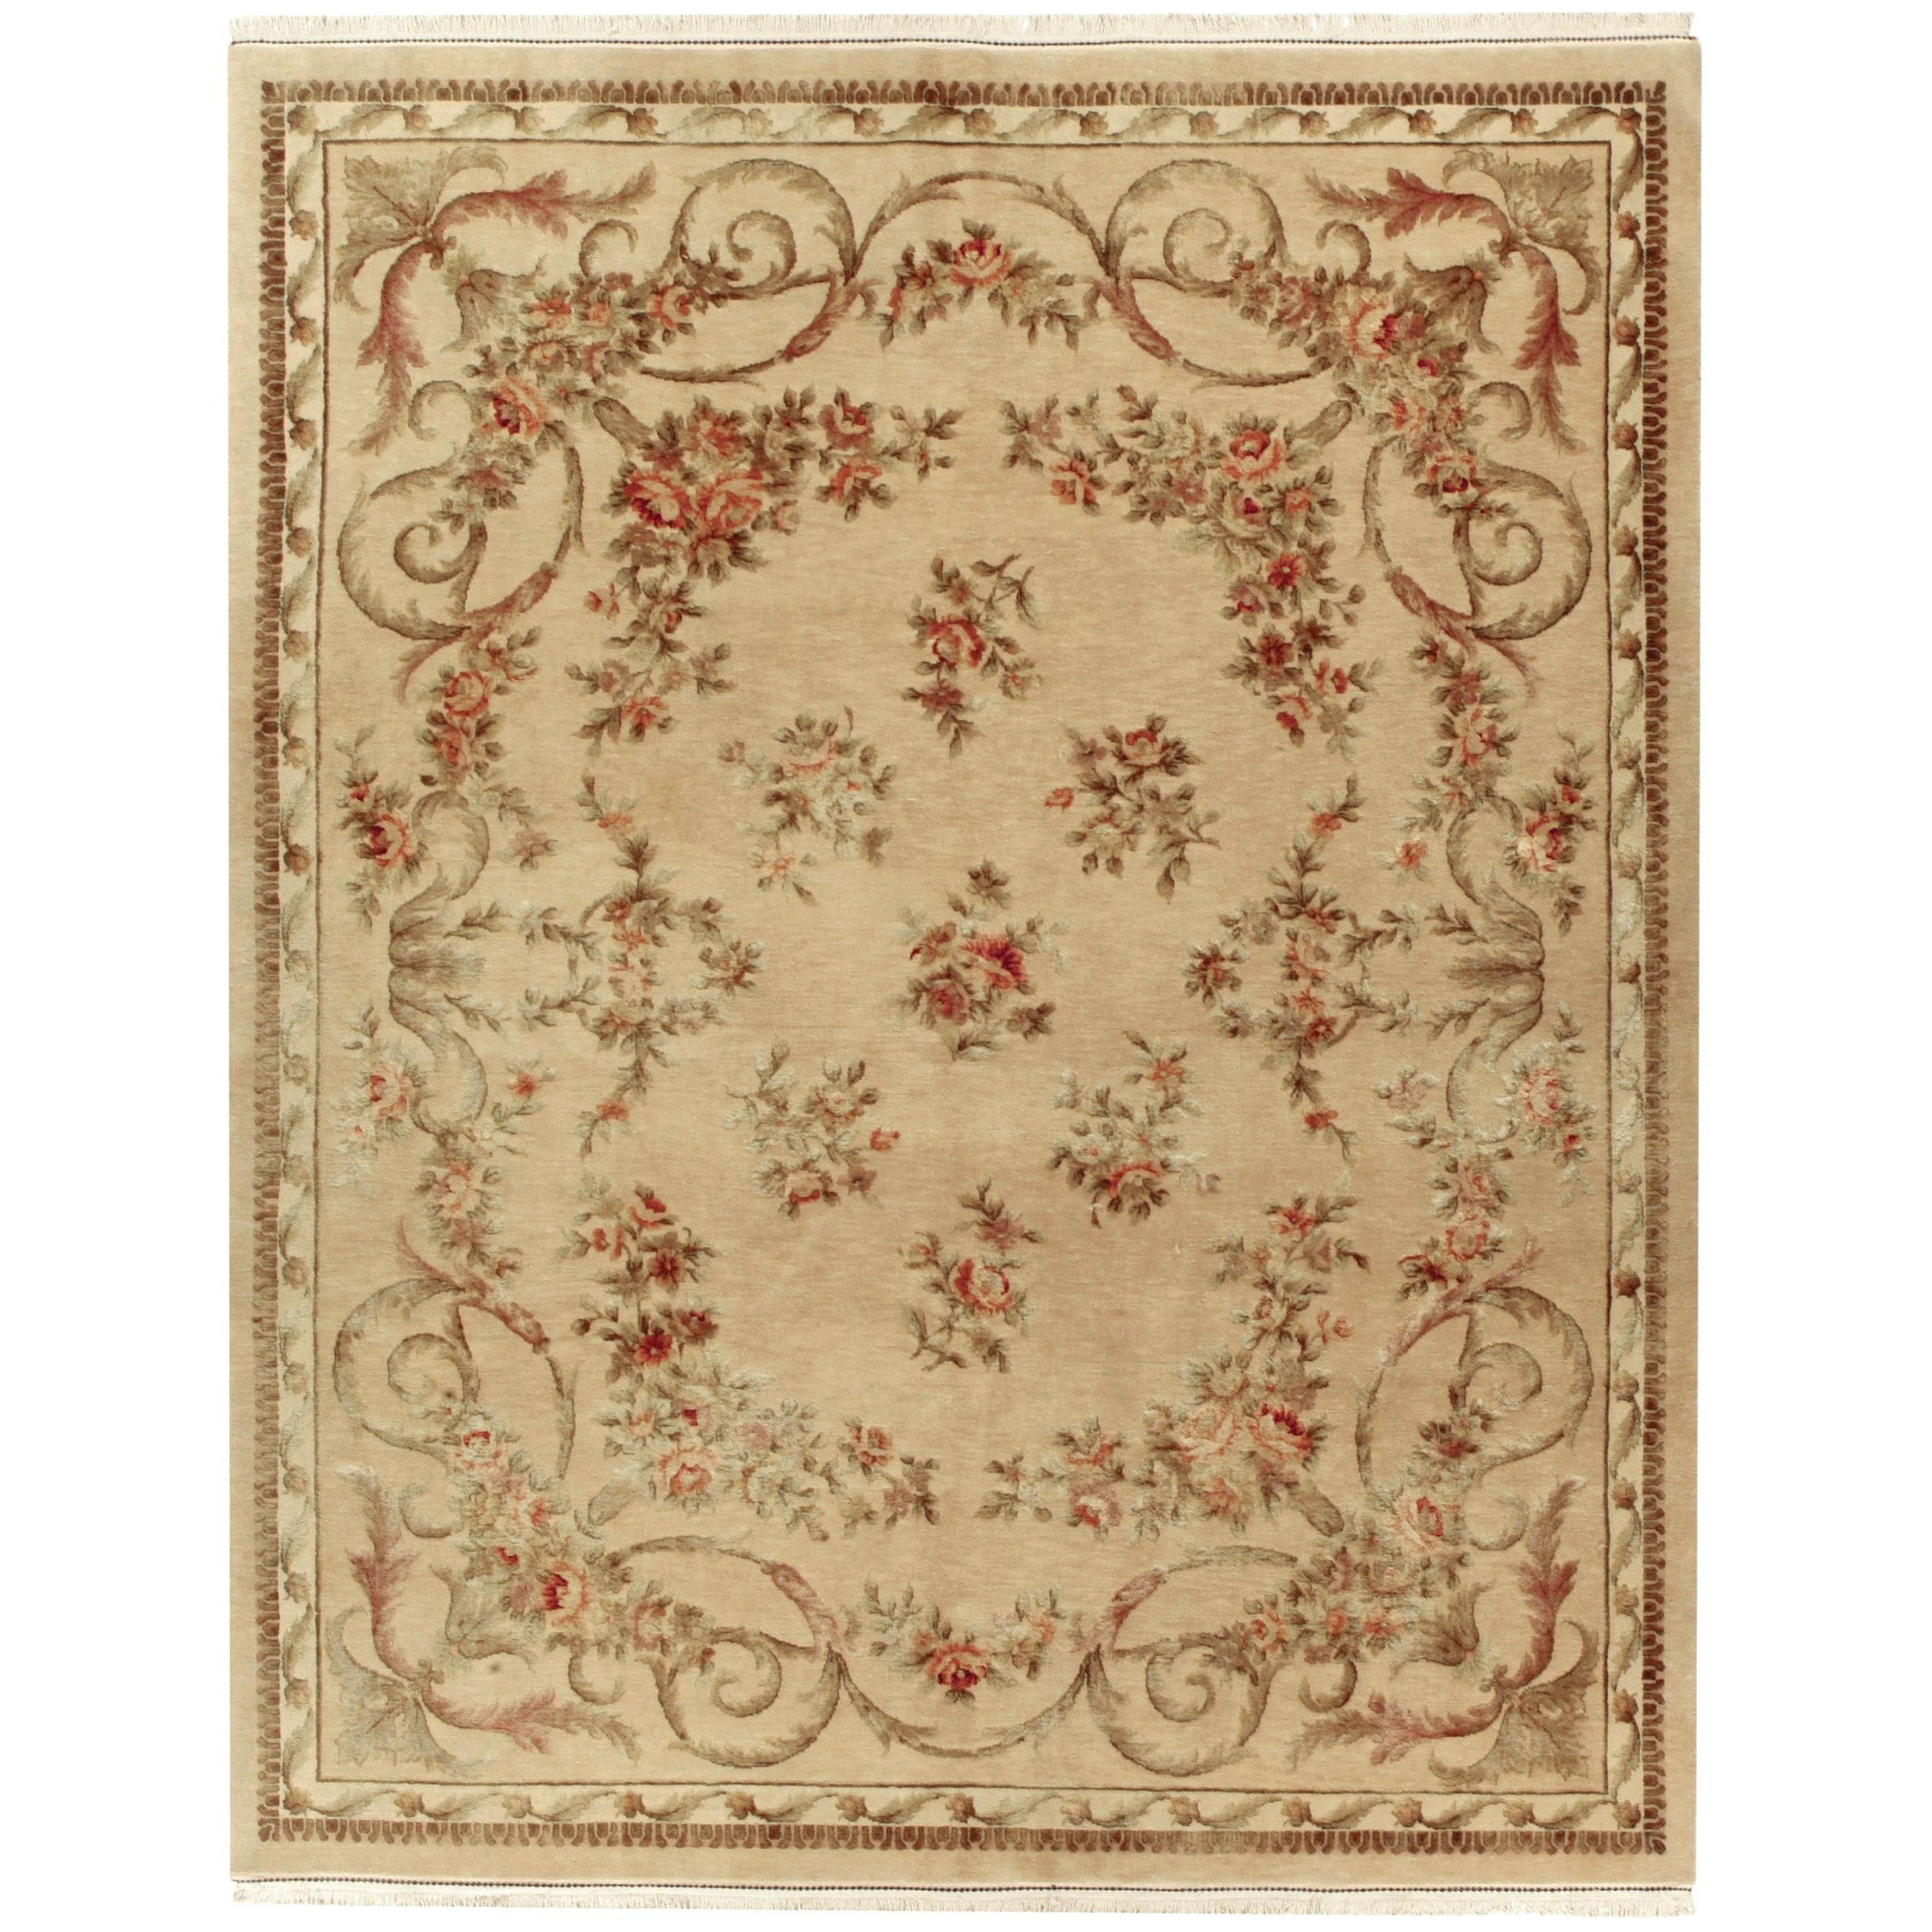 Luxury European Hand-Knotted Shenandoah Birch 12X15 Rug For Sale